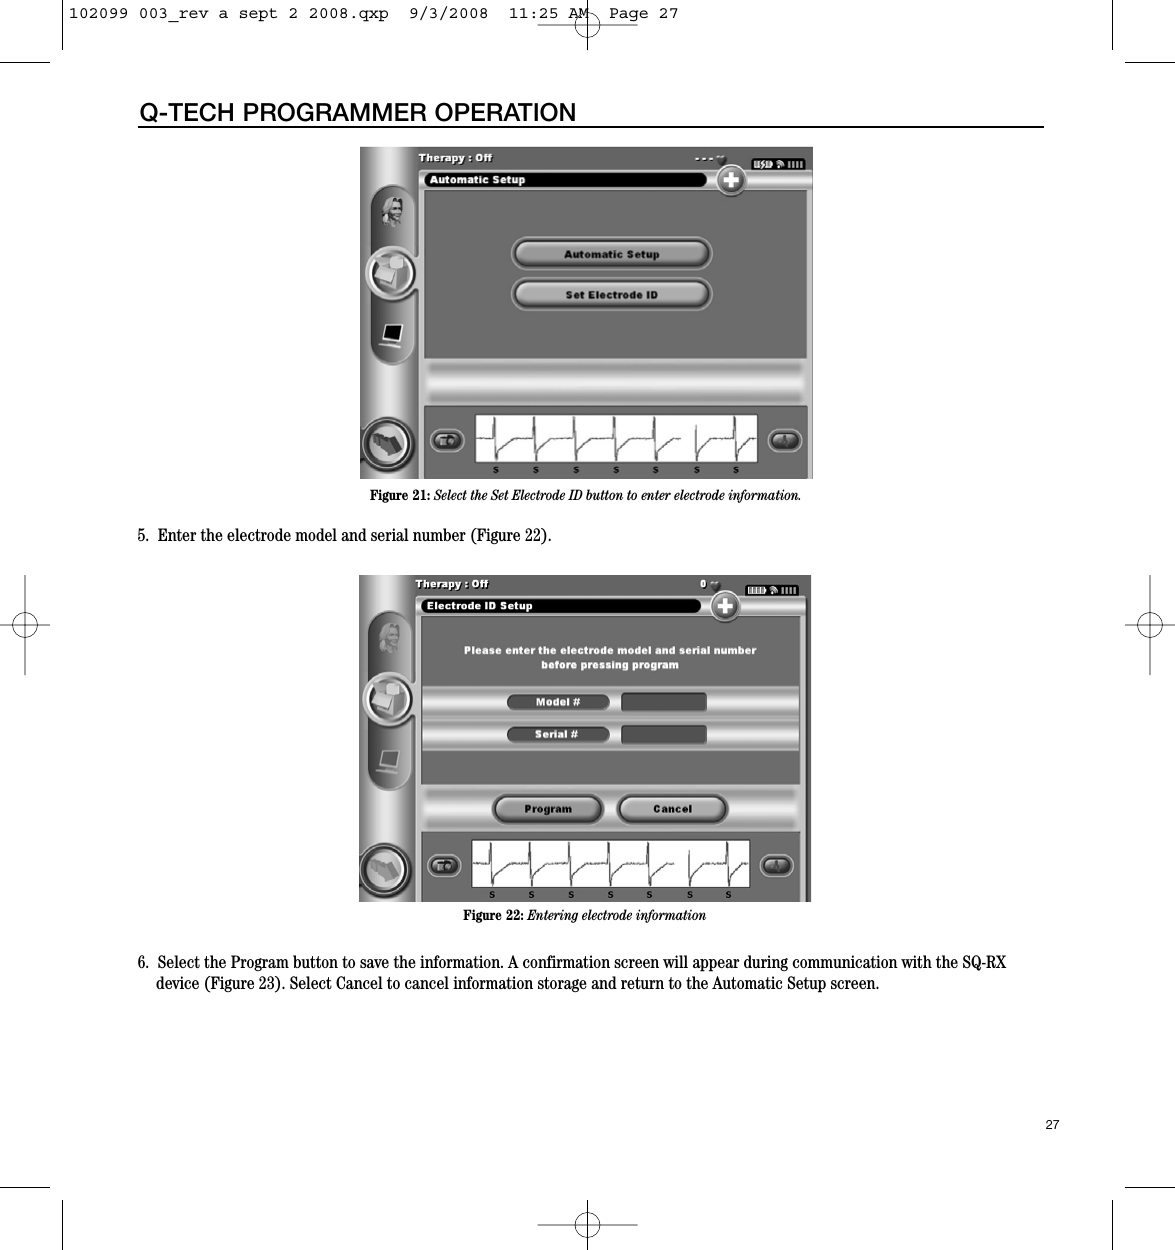 27Q-TECH PROGRAMMER OPERATION5.  Enter the electrode model and serial number (Figure 22).6.  Select the Program button to save the information. A confirmation screen will appear during communication with the SQ-RXdevice (Figure 23). Select Cancel to cancel information storage and return to the Automatic Setup screen.Figure 21: Select the Set Electrode ID button to enter electrode information.Figure 22: Entering electrode information102099 003_rev a sept 2 2008.qxp  9/3/2008  11:25 AM  Page 27